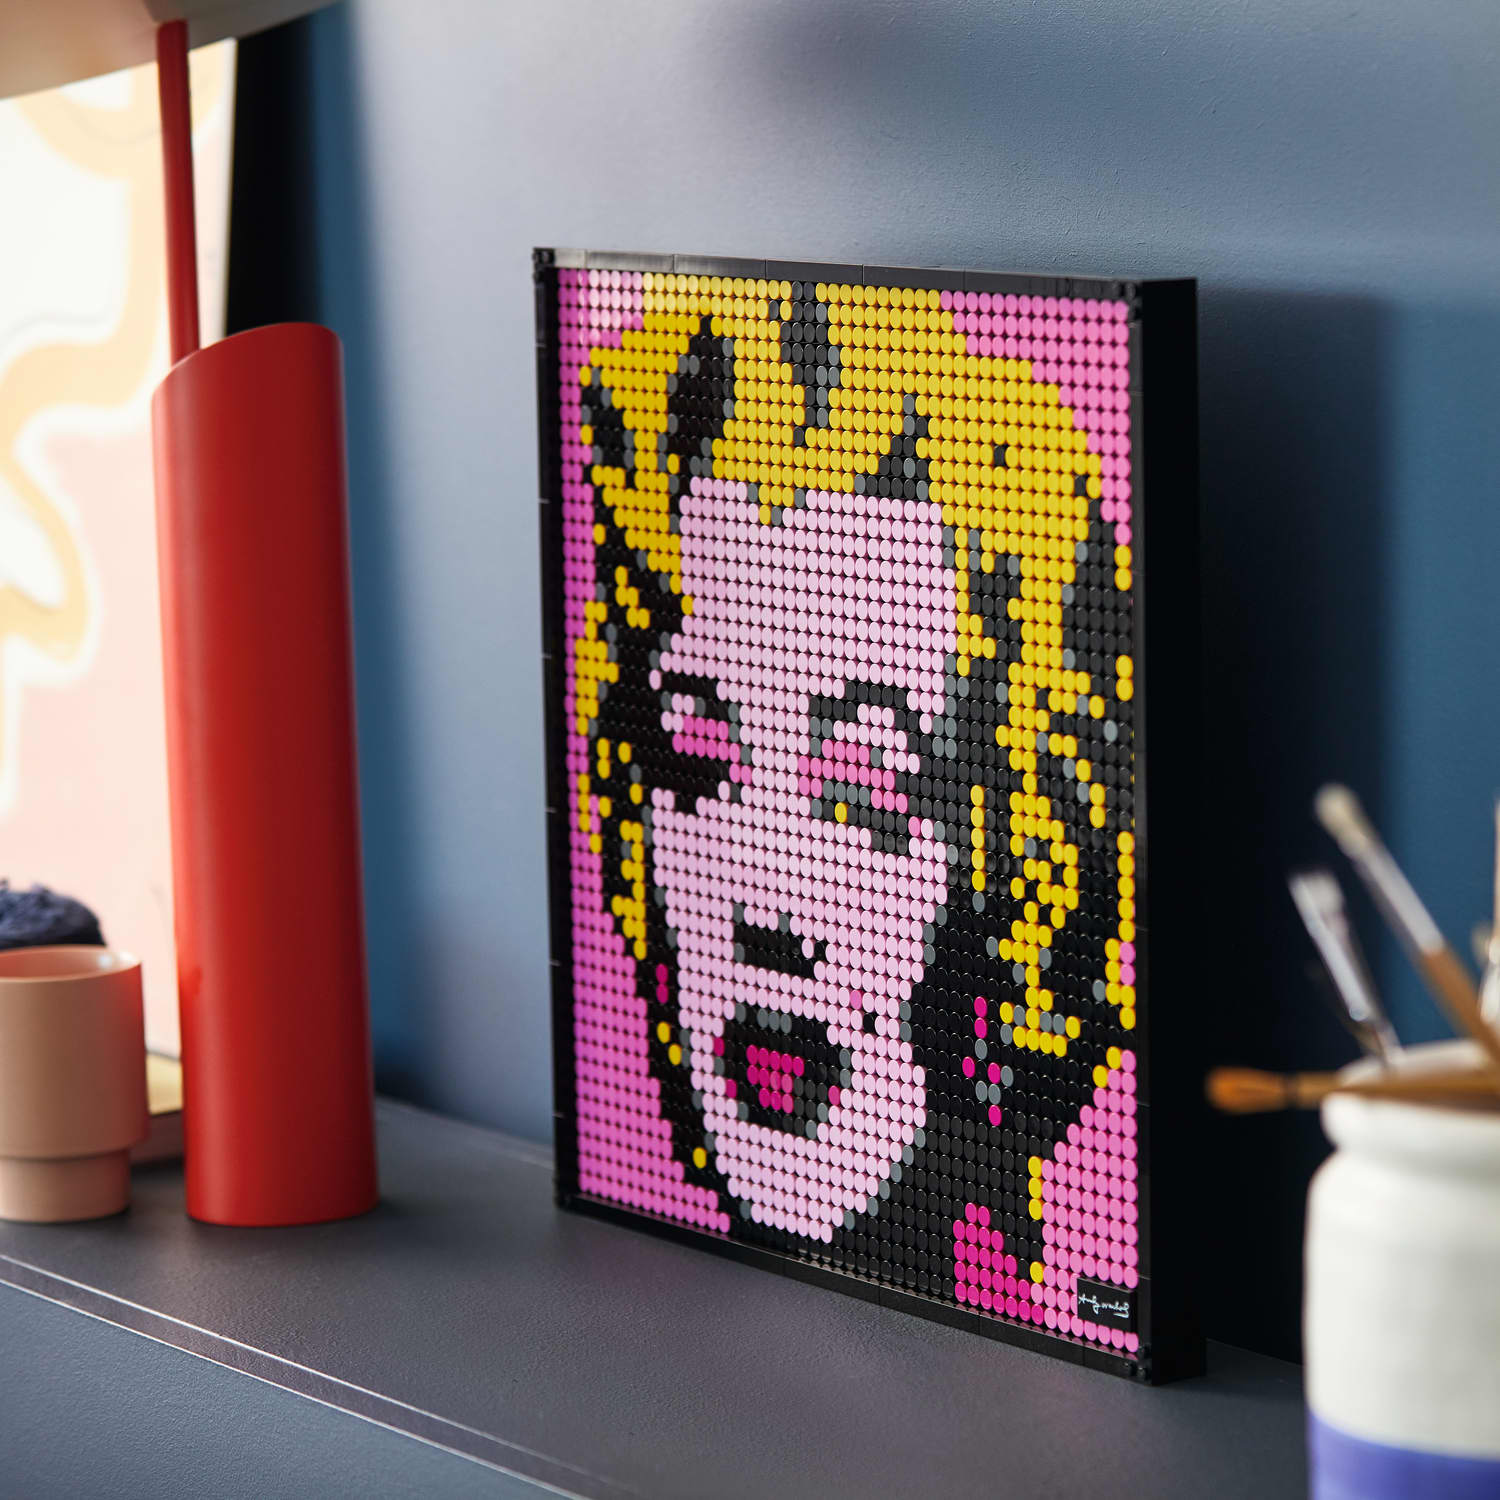 LEGO's New Art Kits Are Meant to Hang On Your Wall